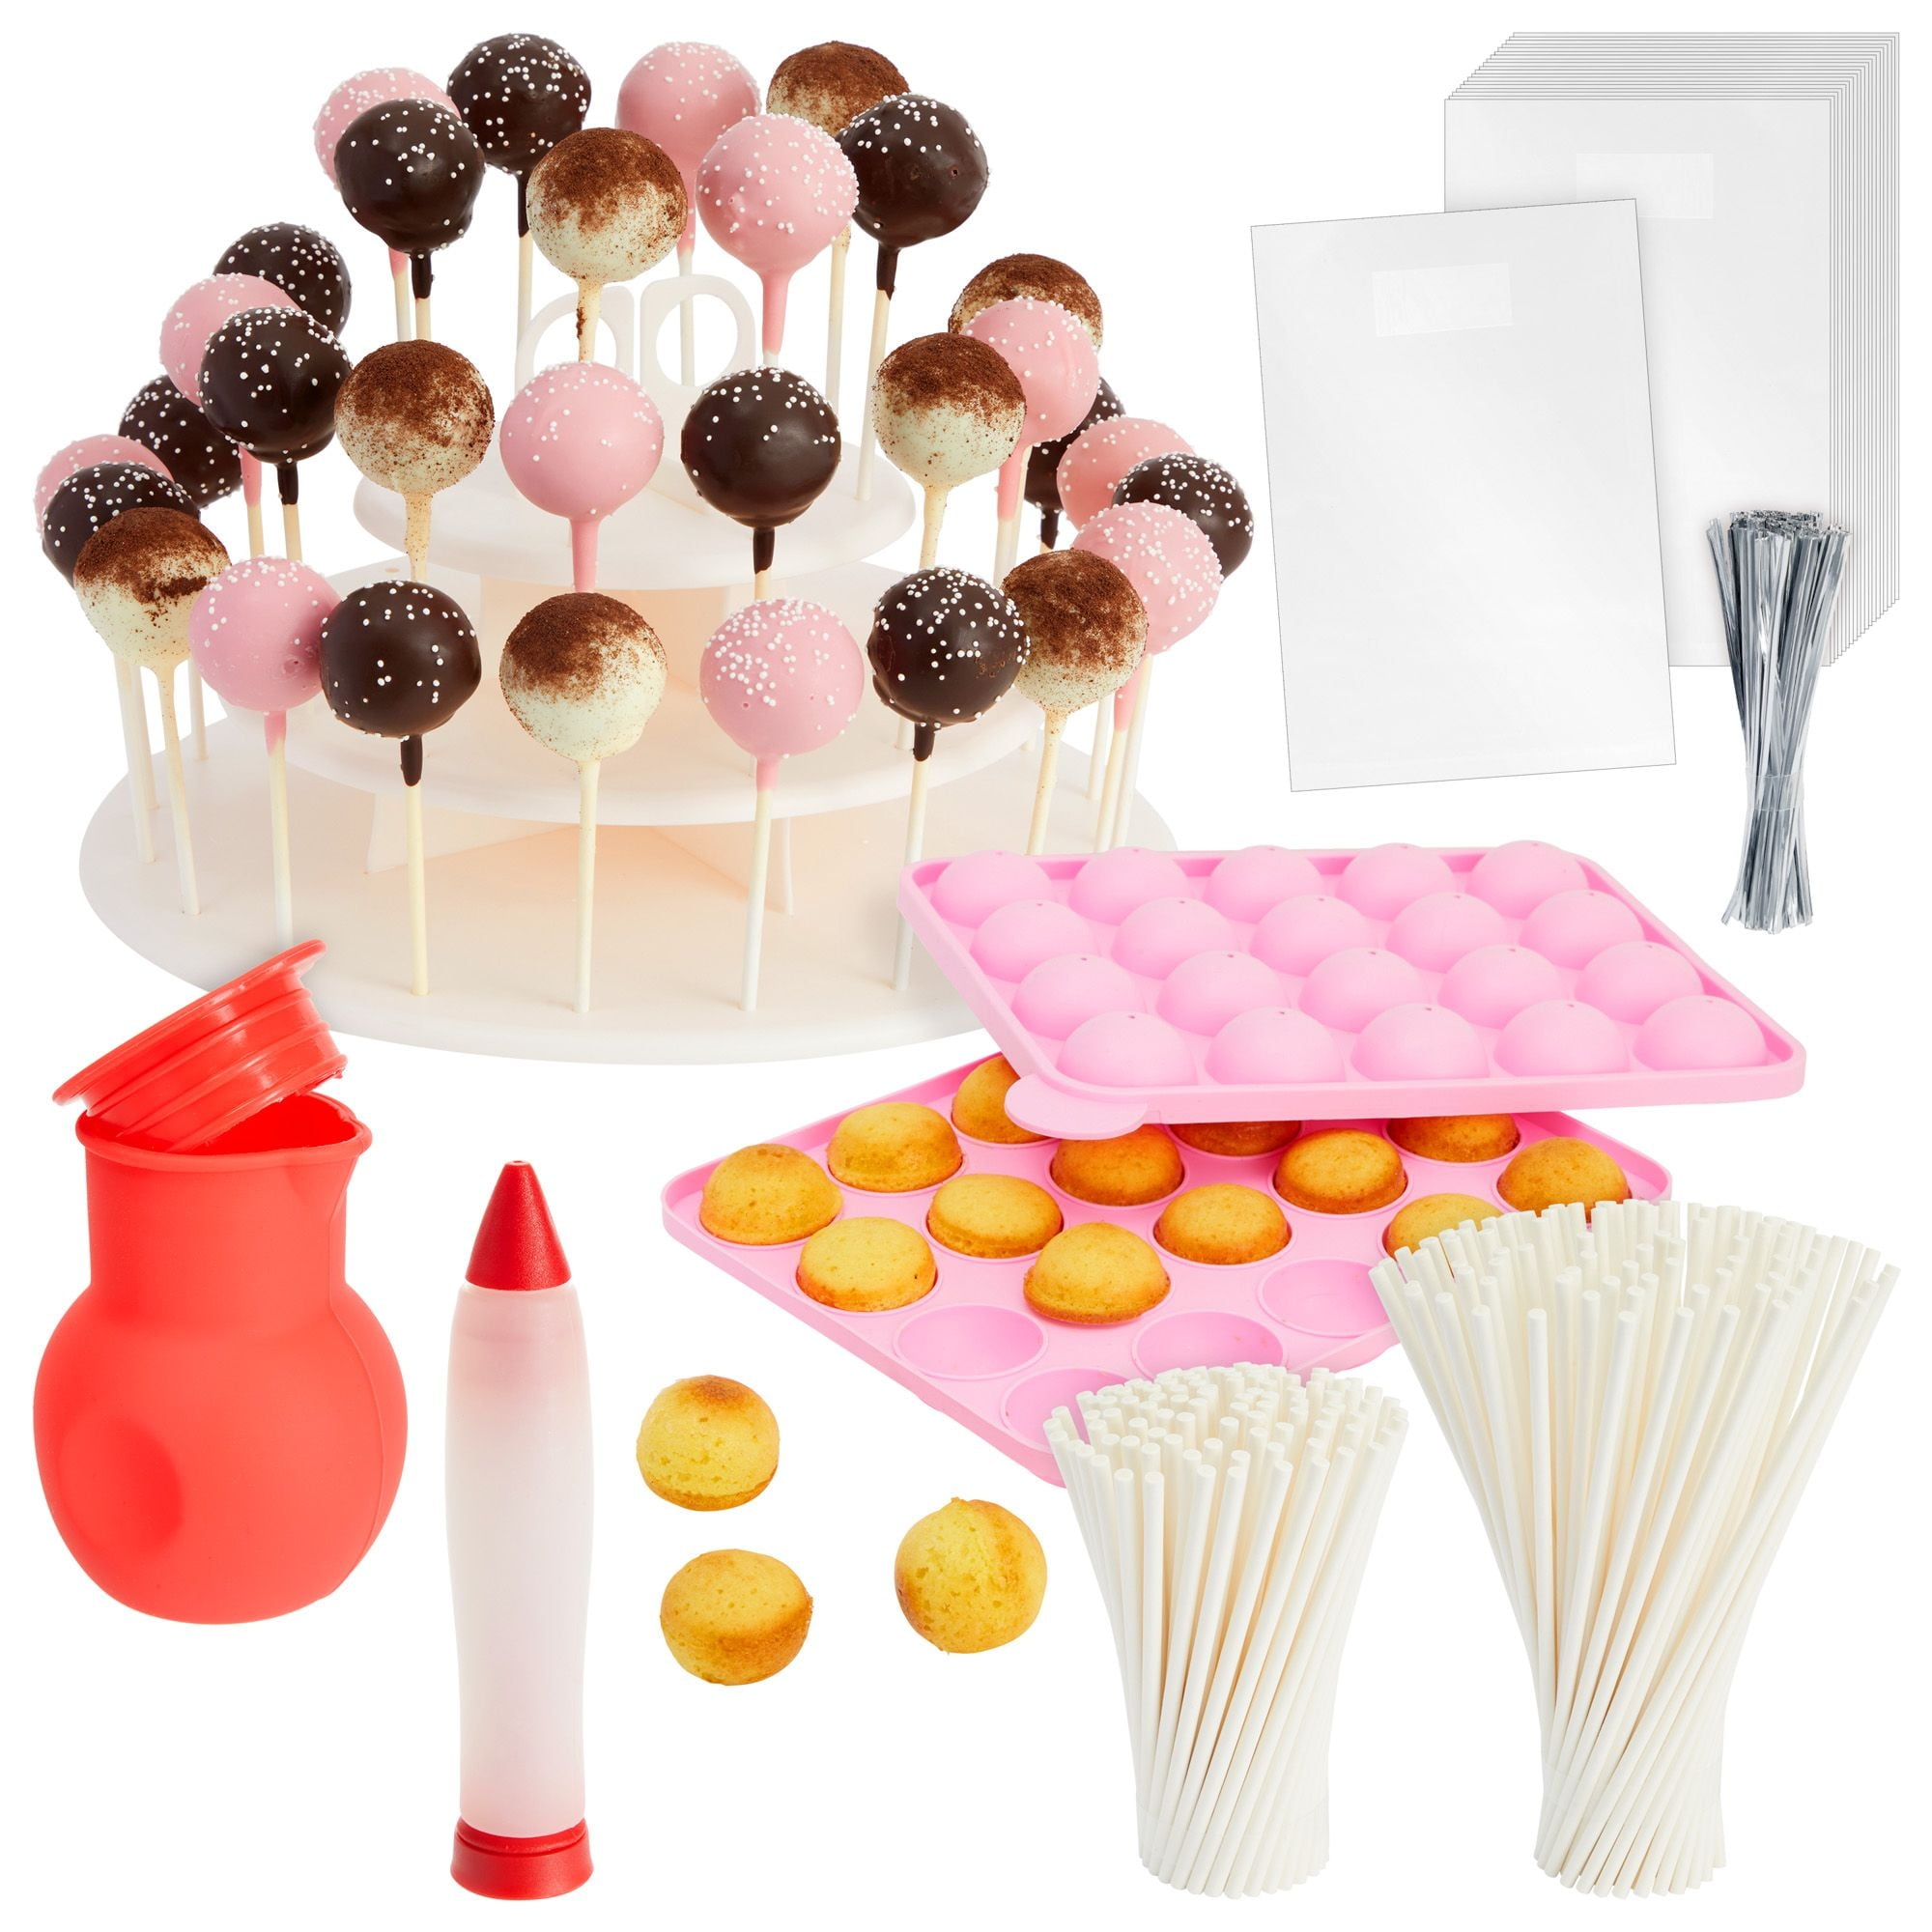 SULICRE Cake Pop Kit Including 6 100 Cake Pop Sticks and Wrappers, 100 Twist Ties, 1 Cake Pop Scooper and Decorating Pen, Cake Pops Making Tools